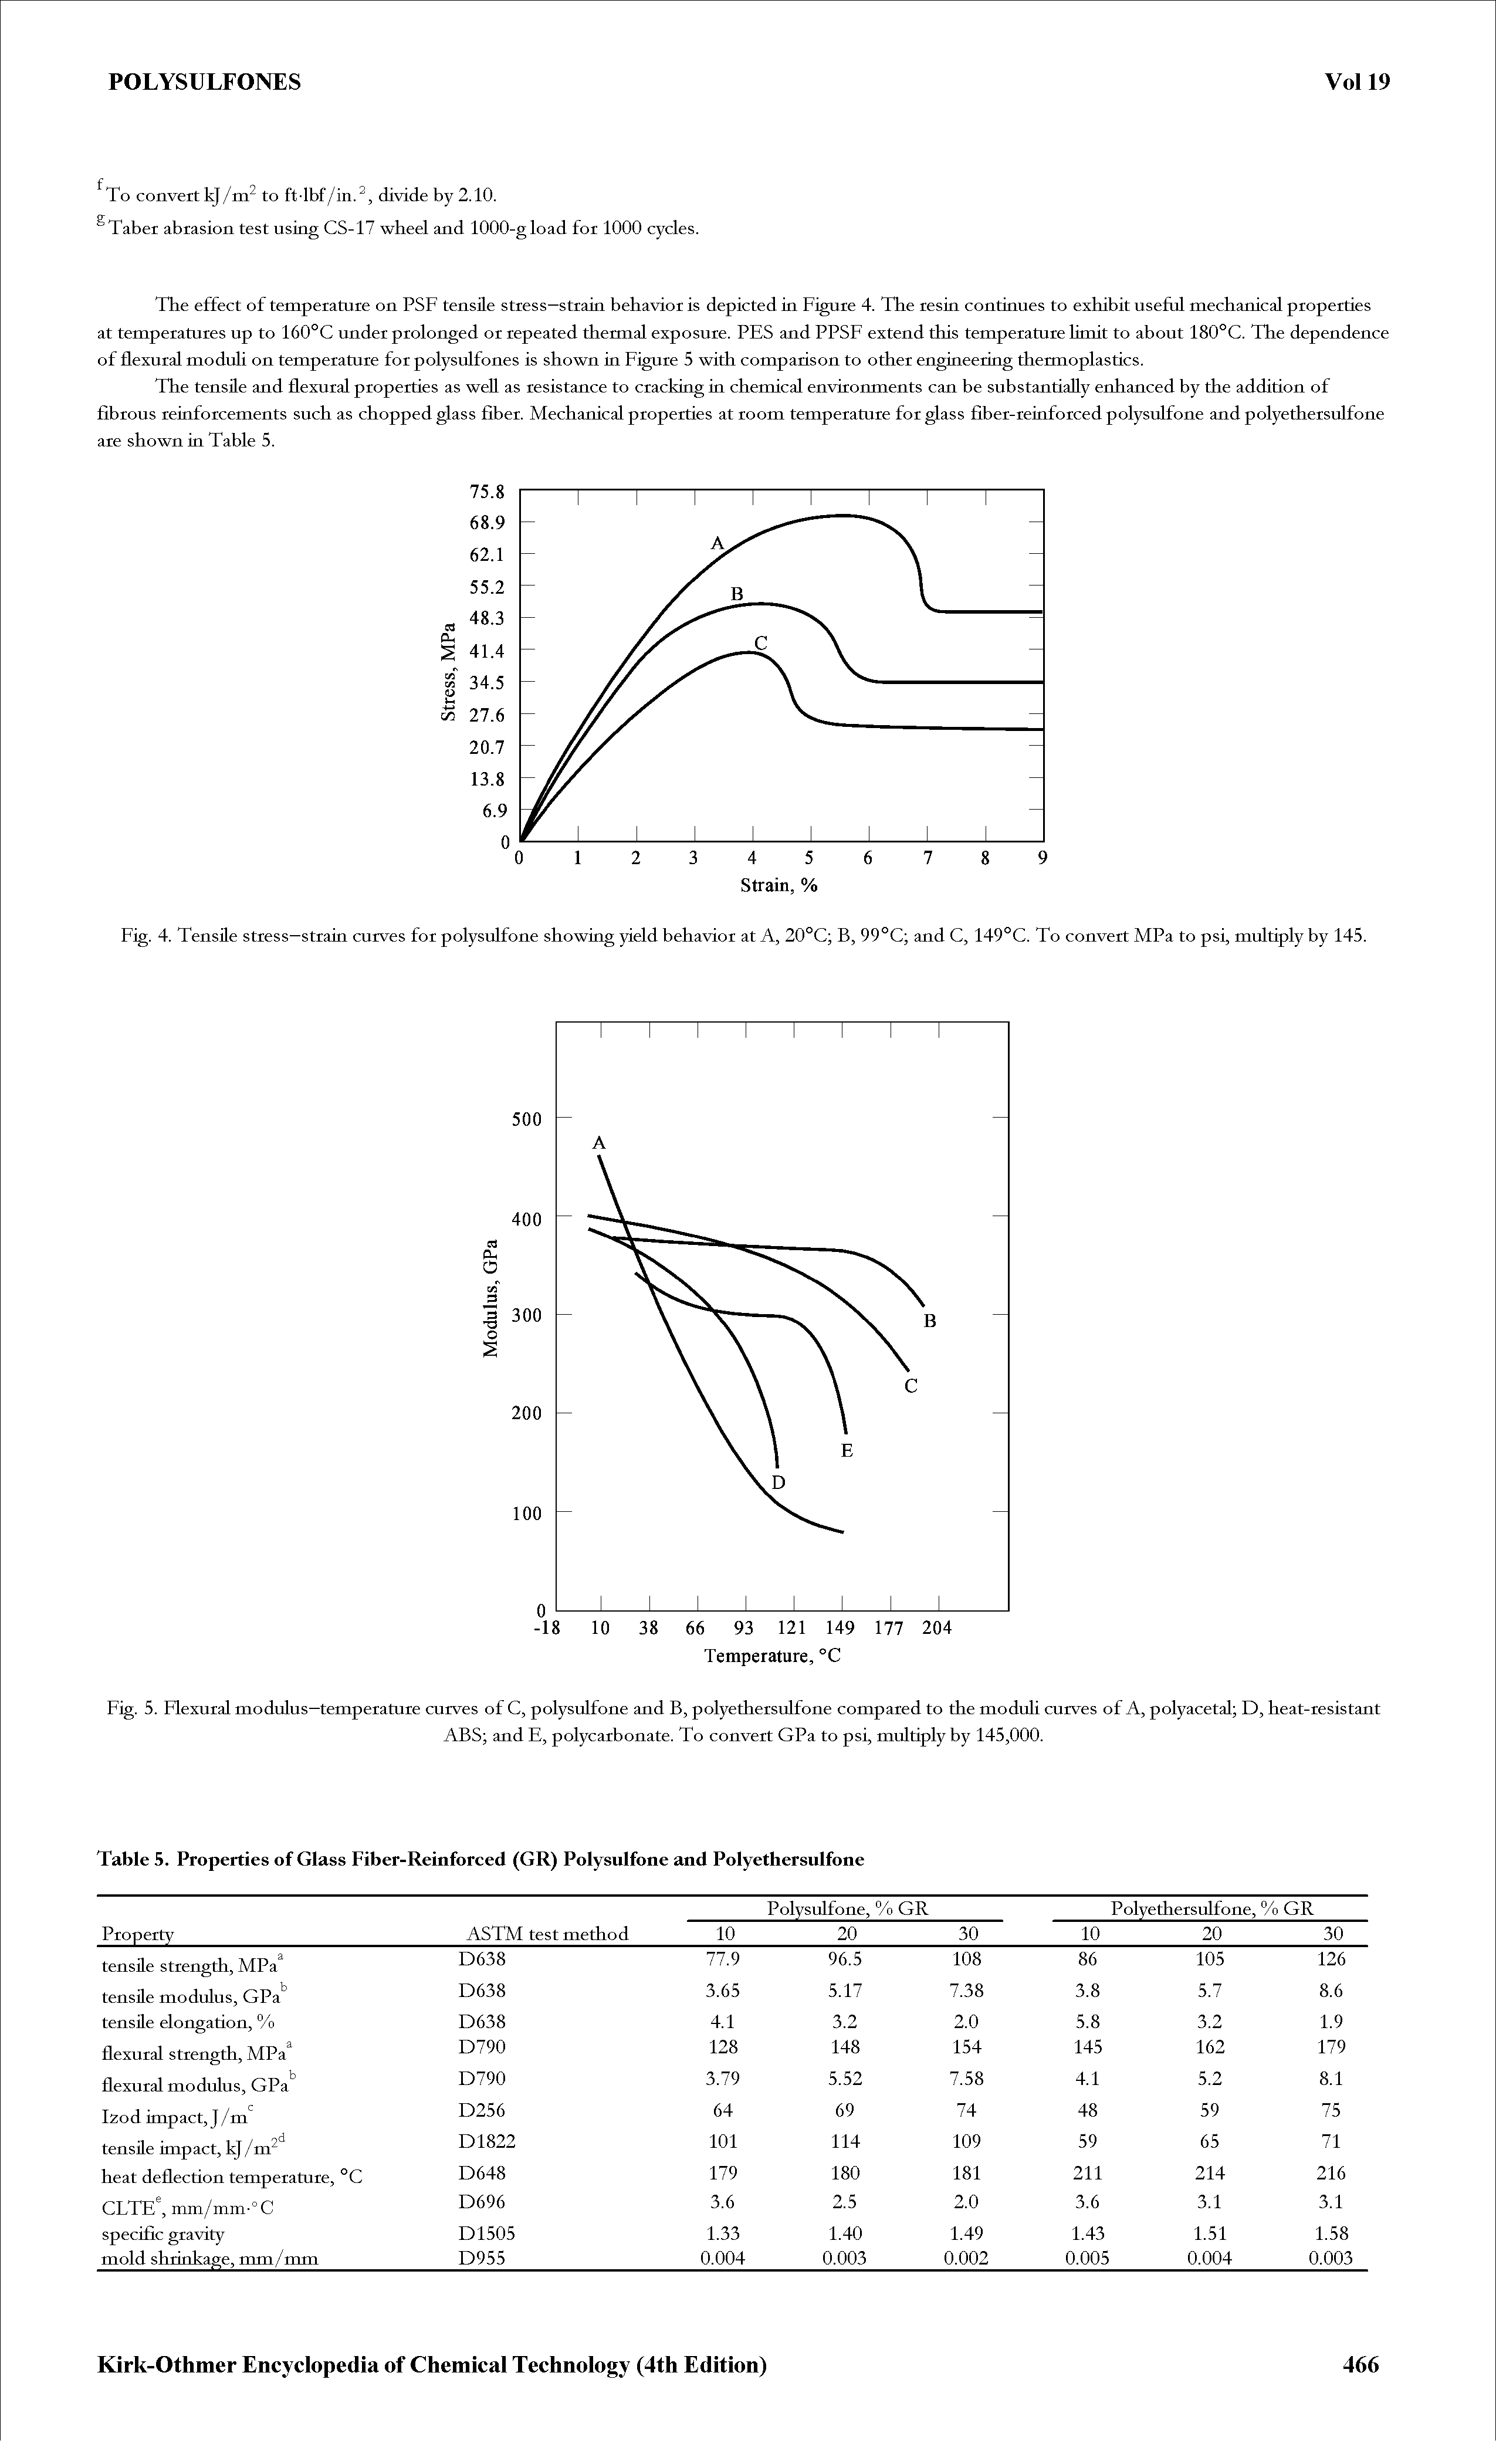 Fig. 4. Tensile stress—strain curves for polysulfone showing yield behavior at A, 20°C B, 99°C and C, 149°C. To convert MPa to psi, multiply by 145.